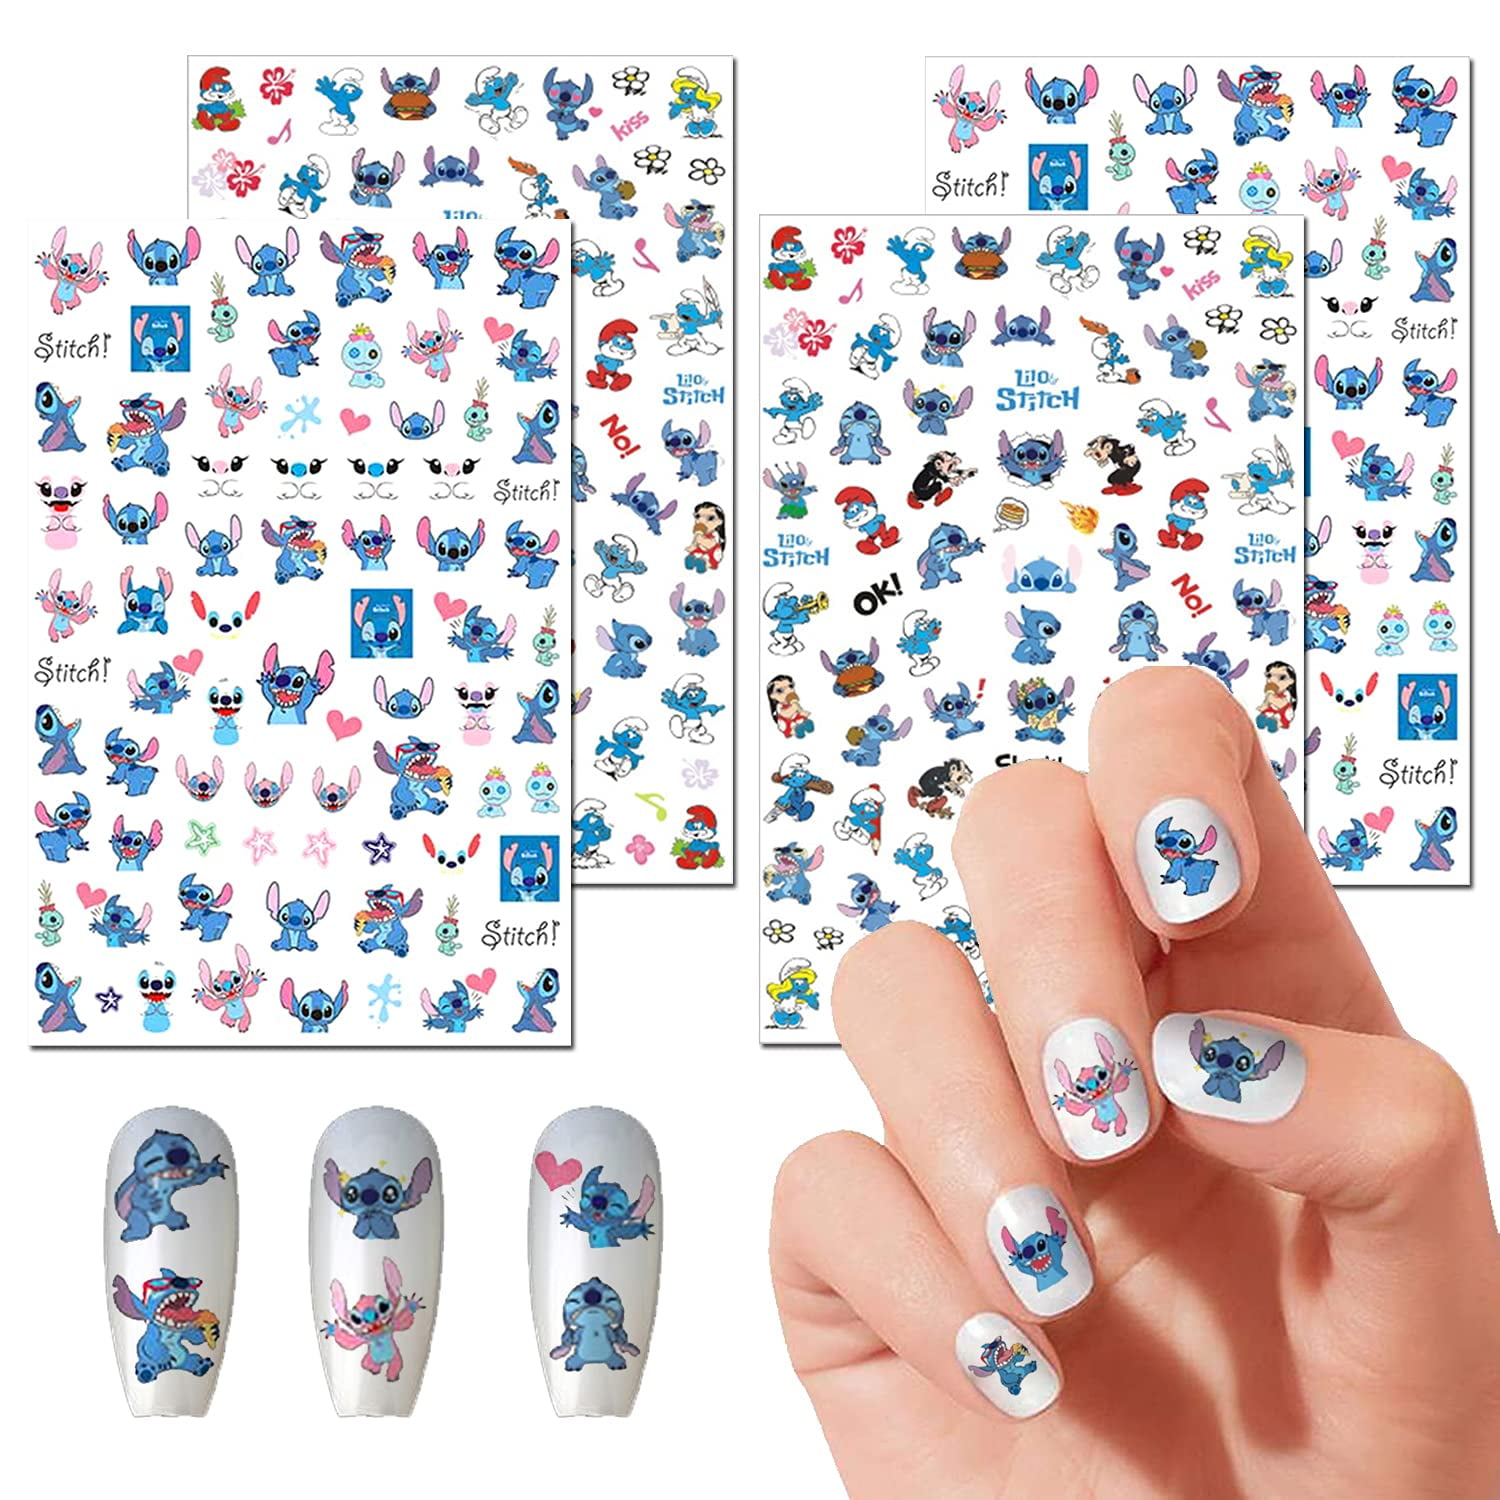 63 Anime Nail Art Designs for 2023  Nerd About Town